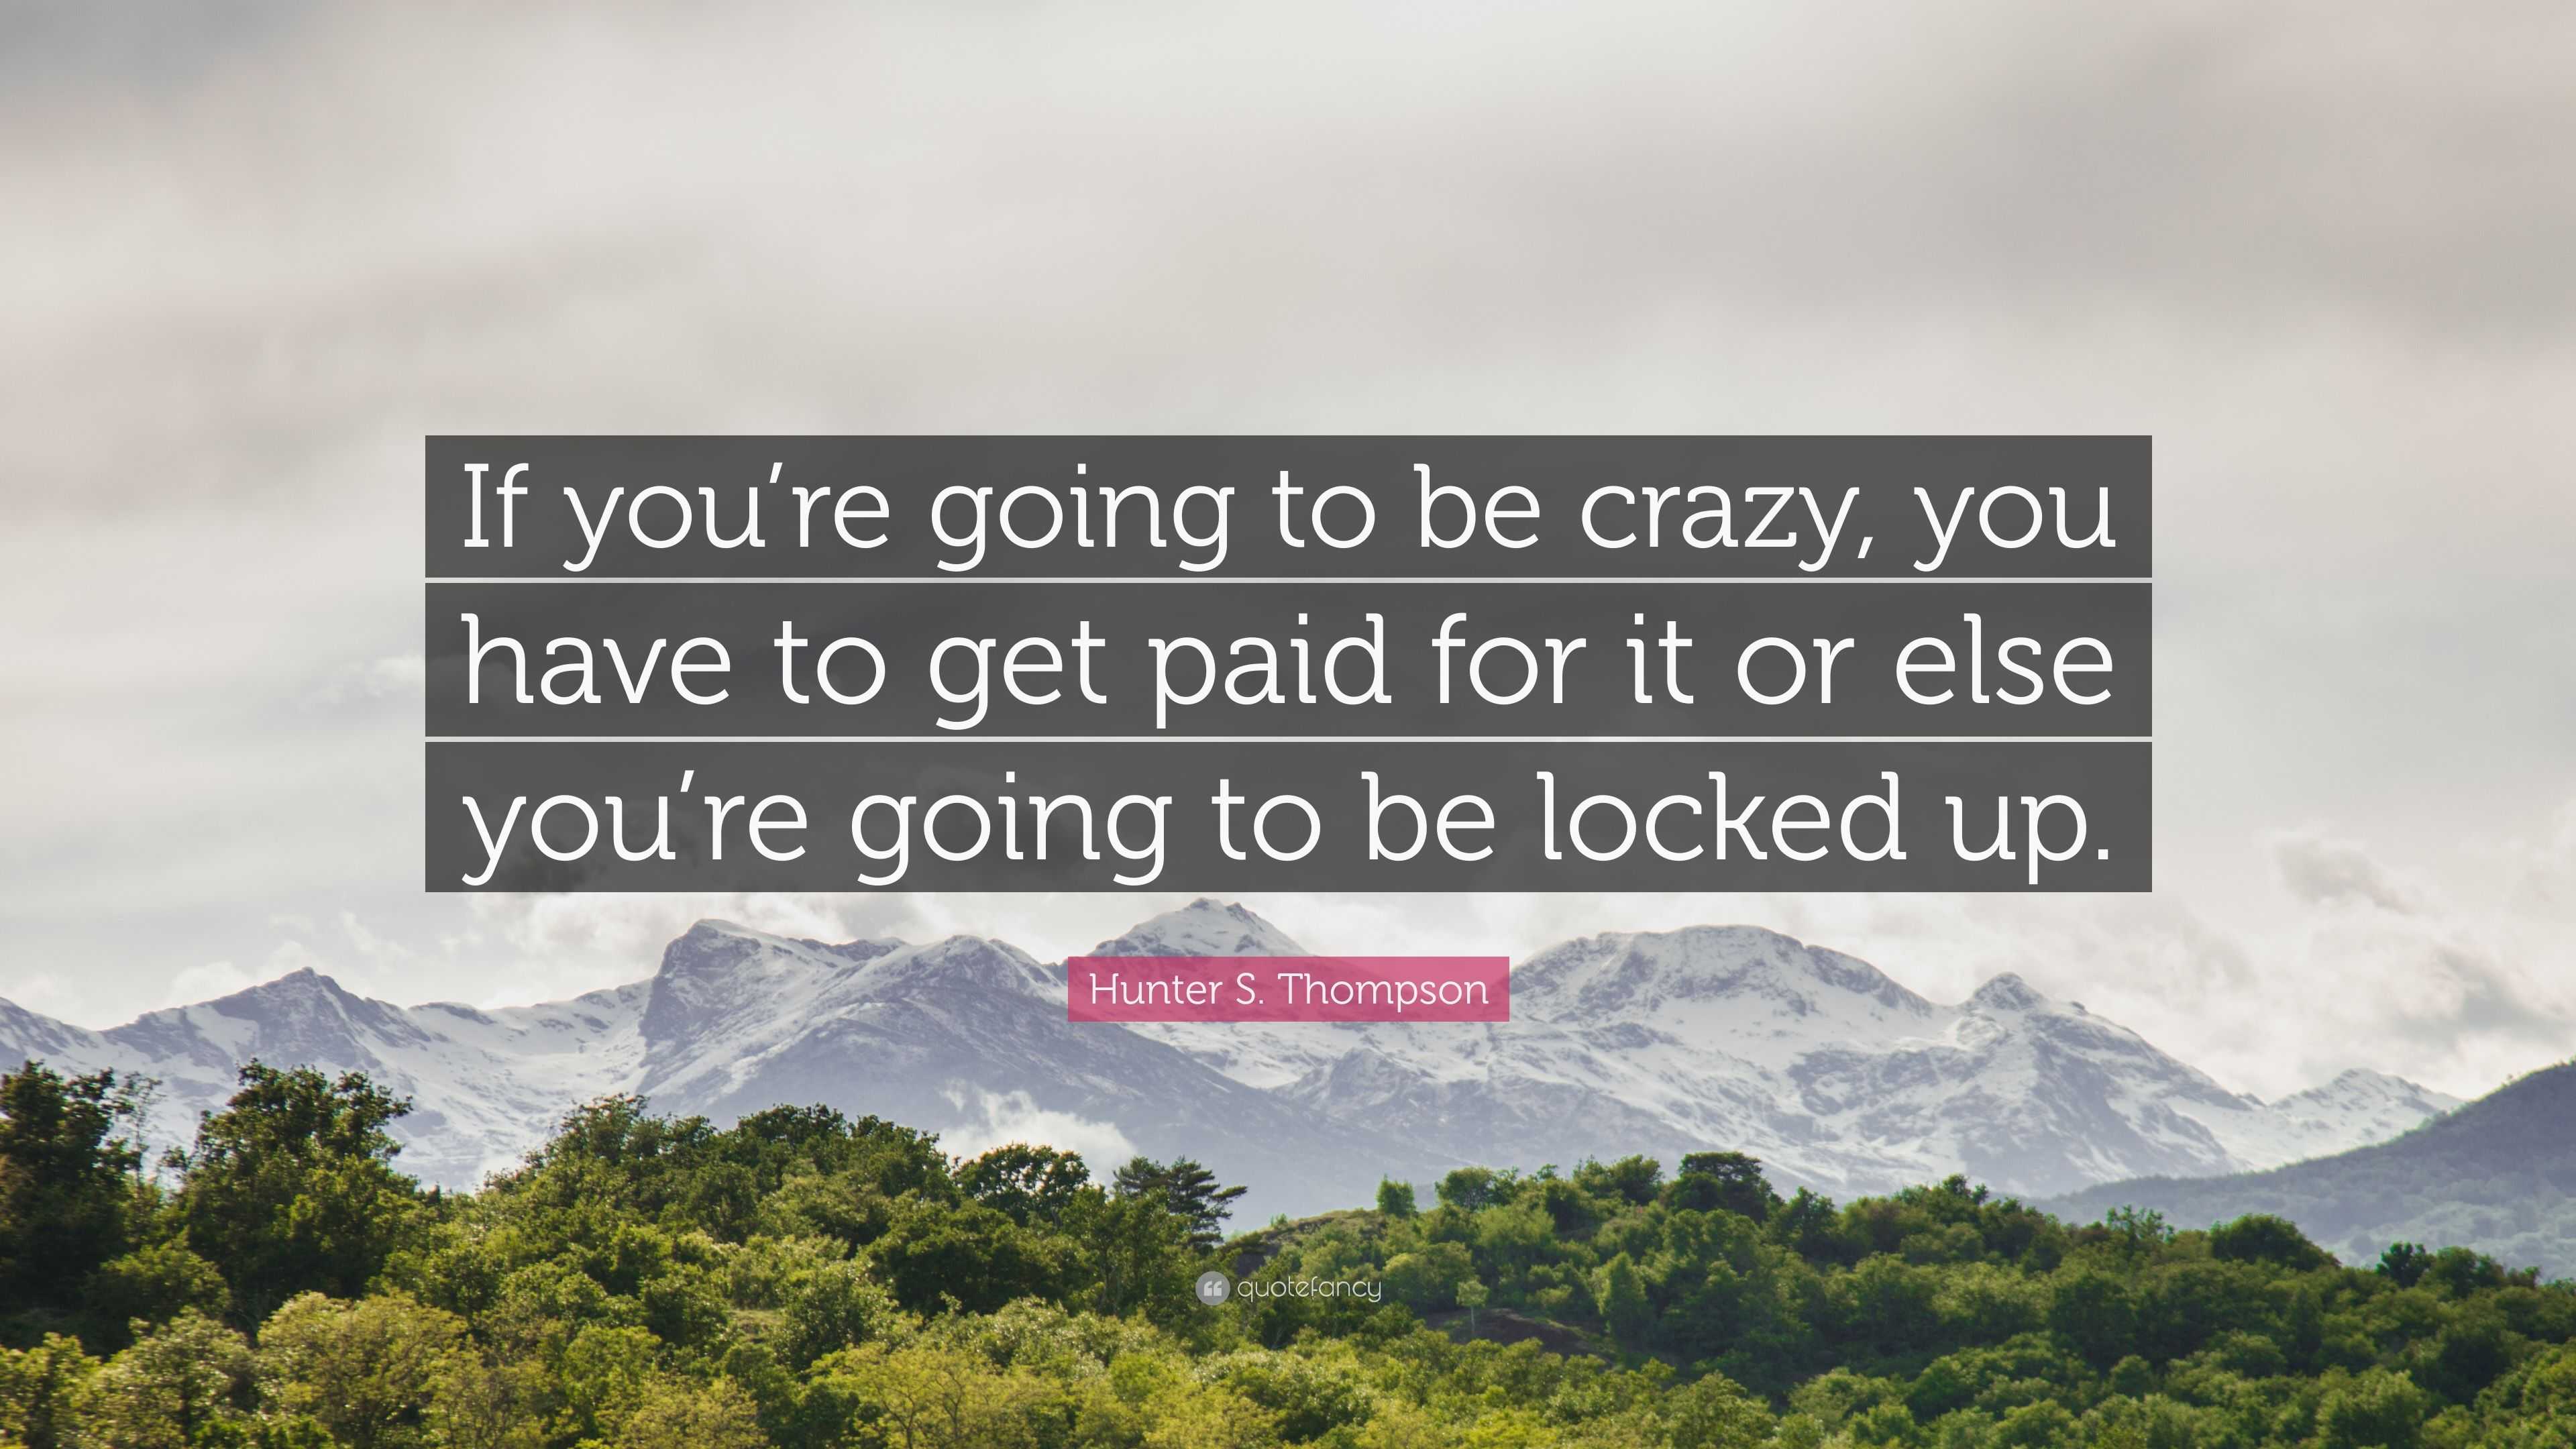 Hunter S. Thompson Quote: “If you're going to be crazy, you have